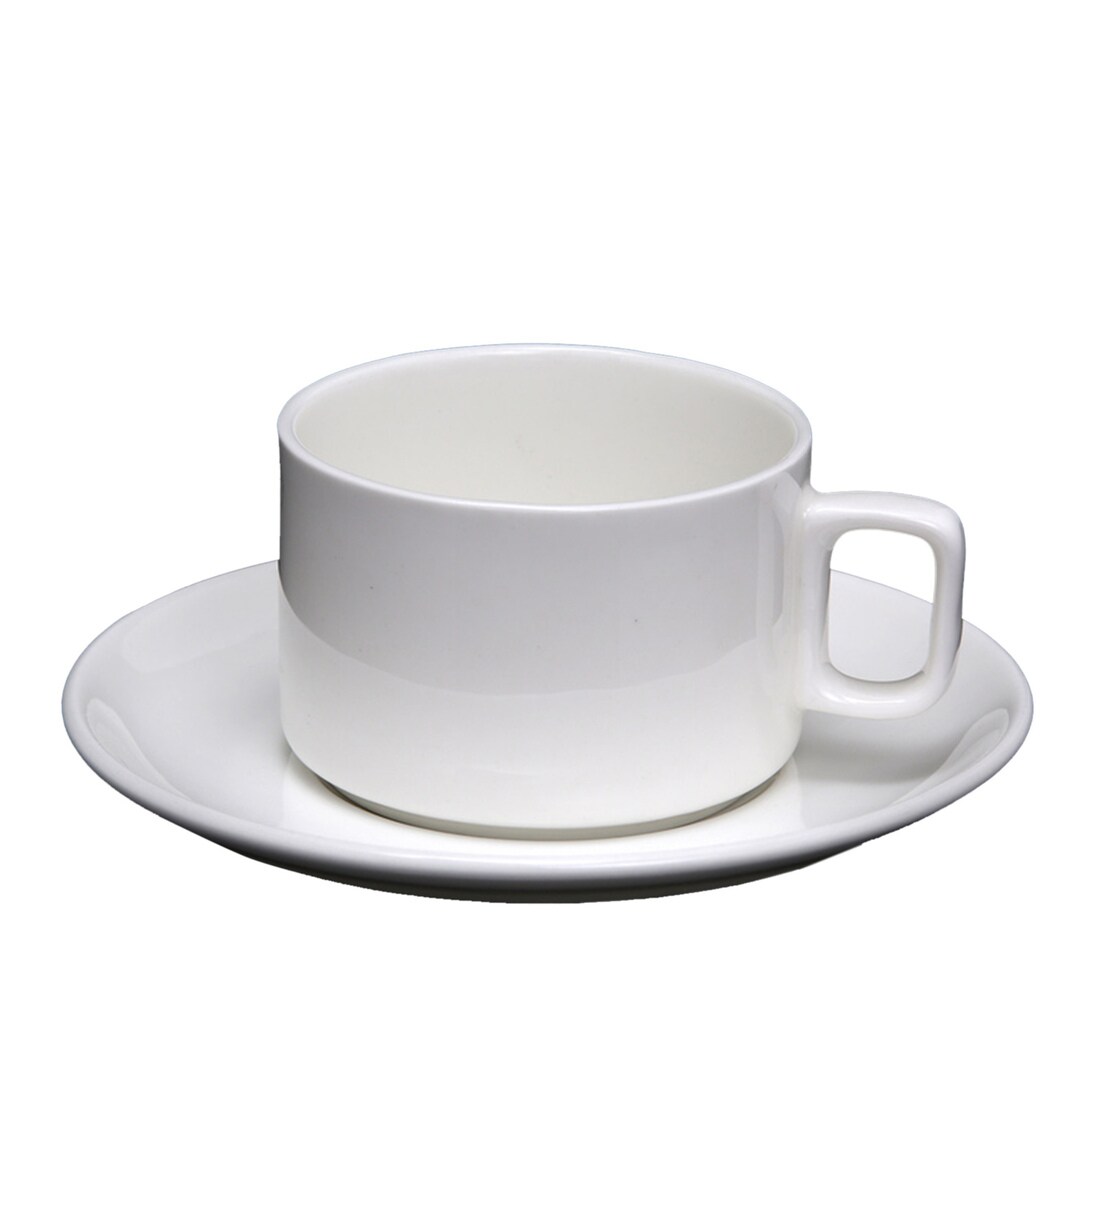 Buy 200 Ml White Bone China Cups And Saucers Set Of 6 By Bp Bharat Online Cups And Saucers Cups 5806